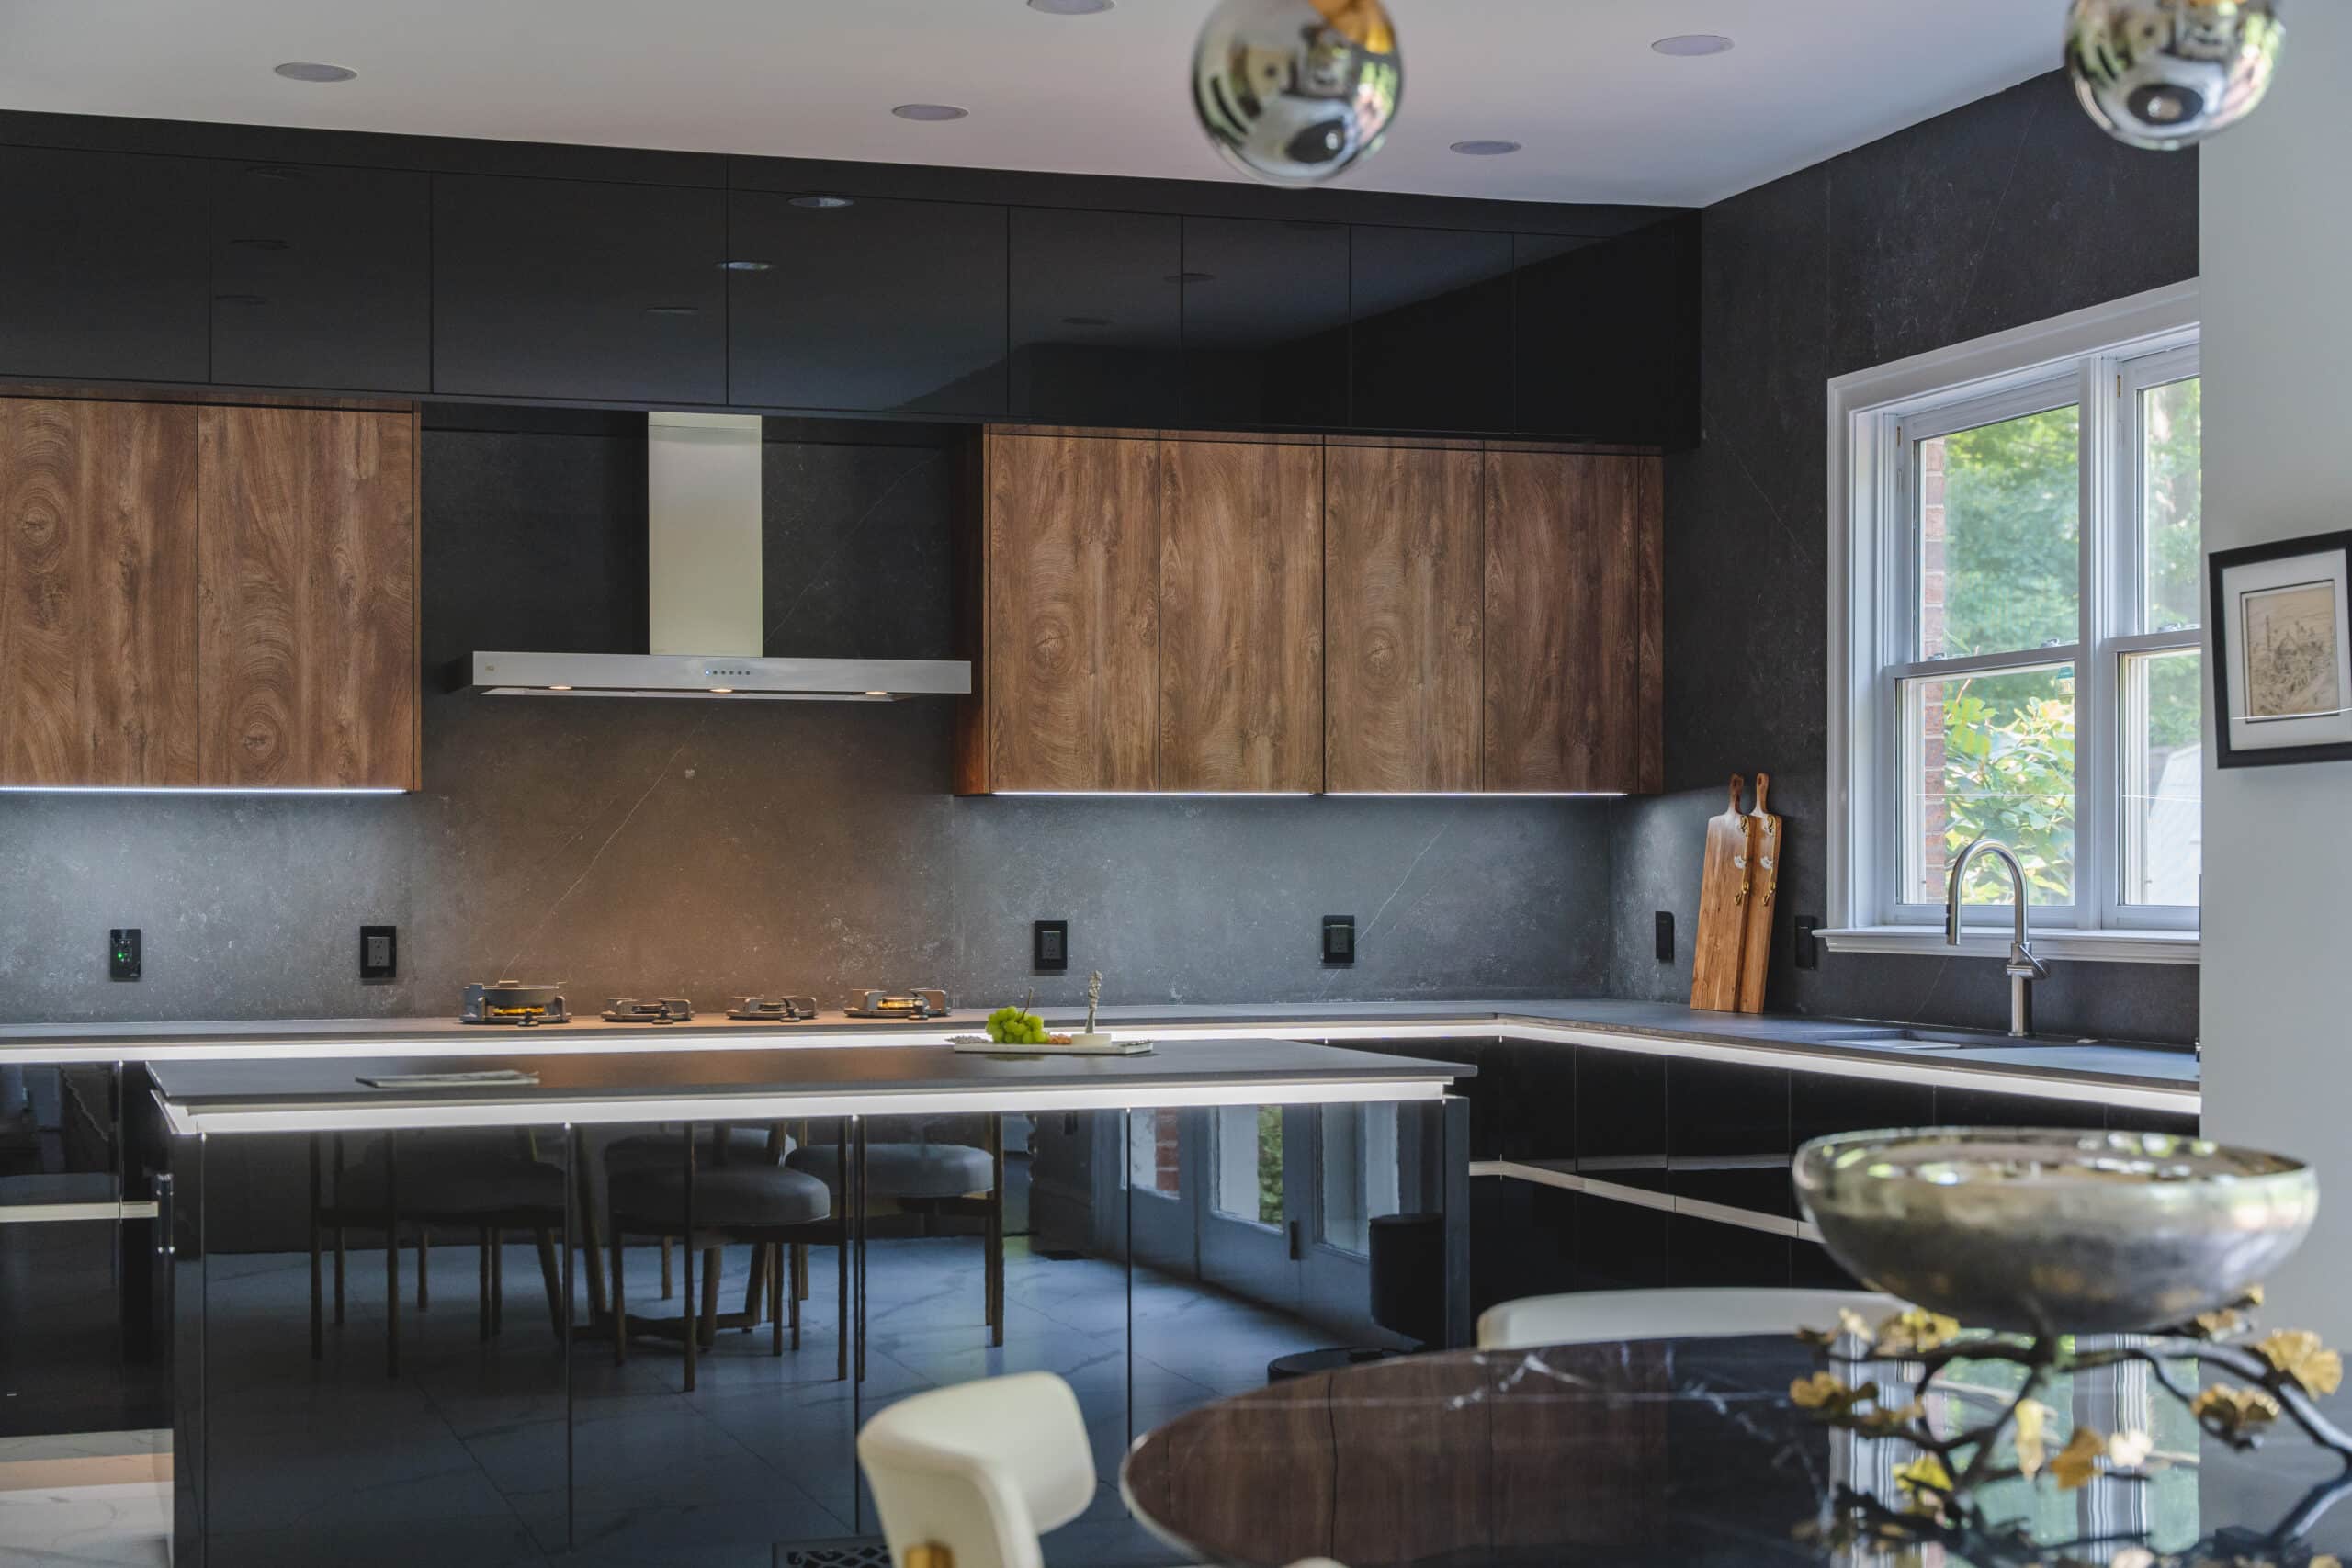 A contemporary kitchen featuring sleek black cabinets and a matching black countertop